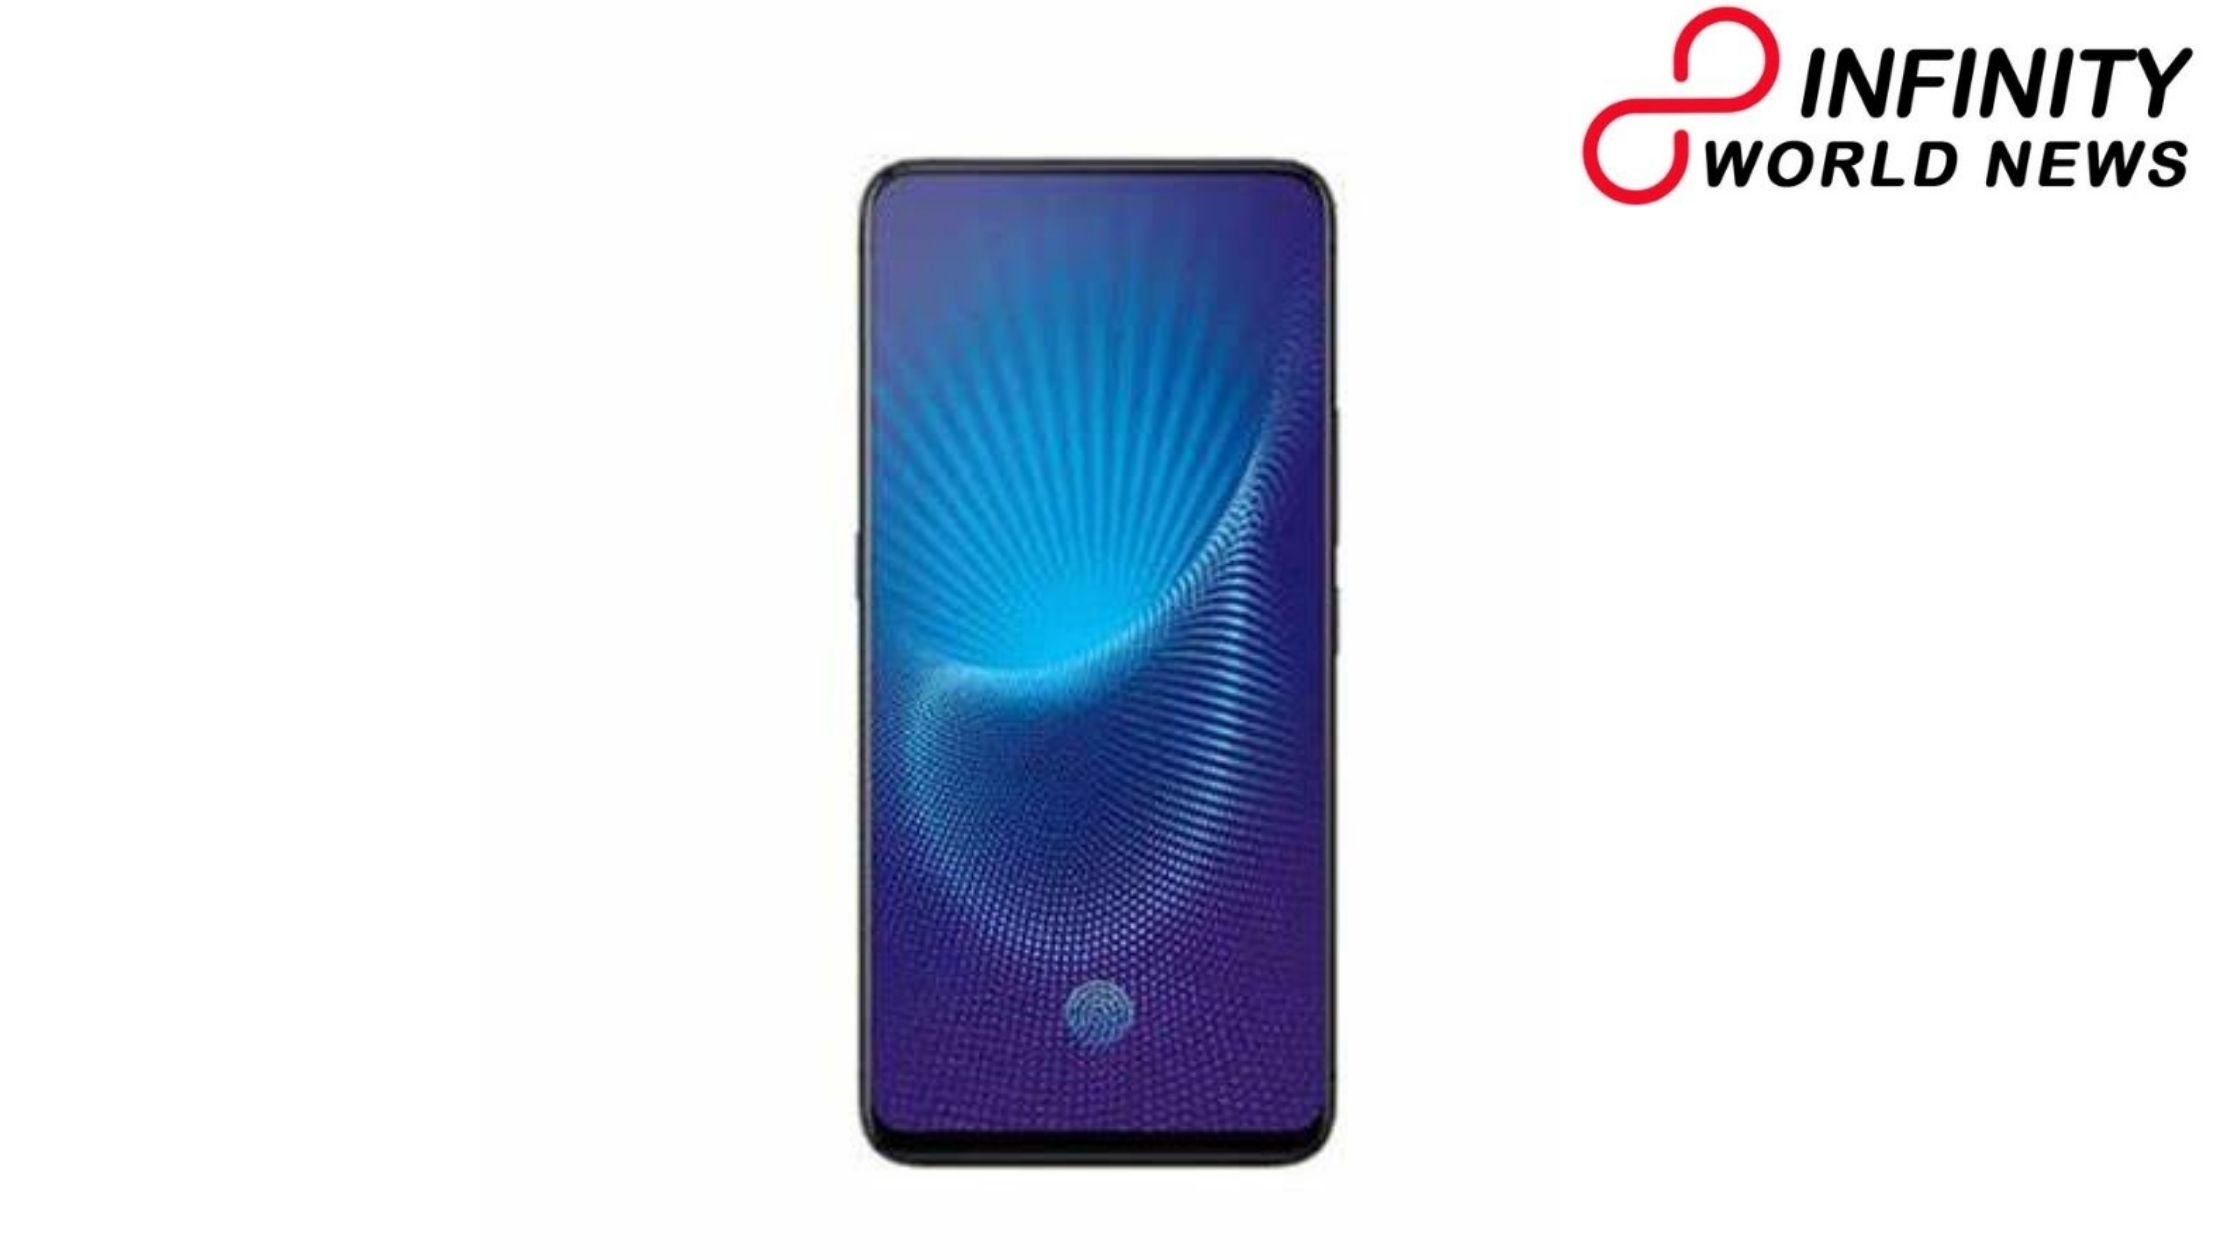 Vivo S9 Specifications Surface Online, May Feature Dual Selfie Cameras also Thin Design